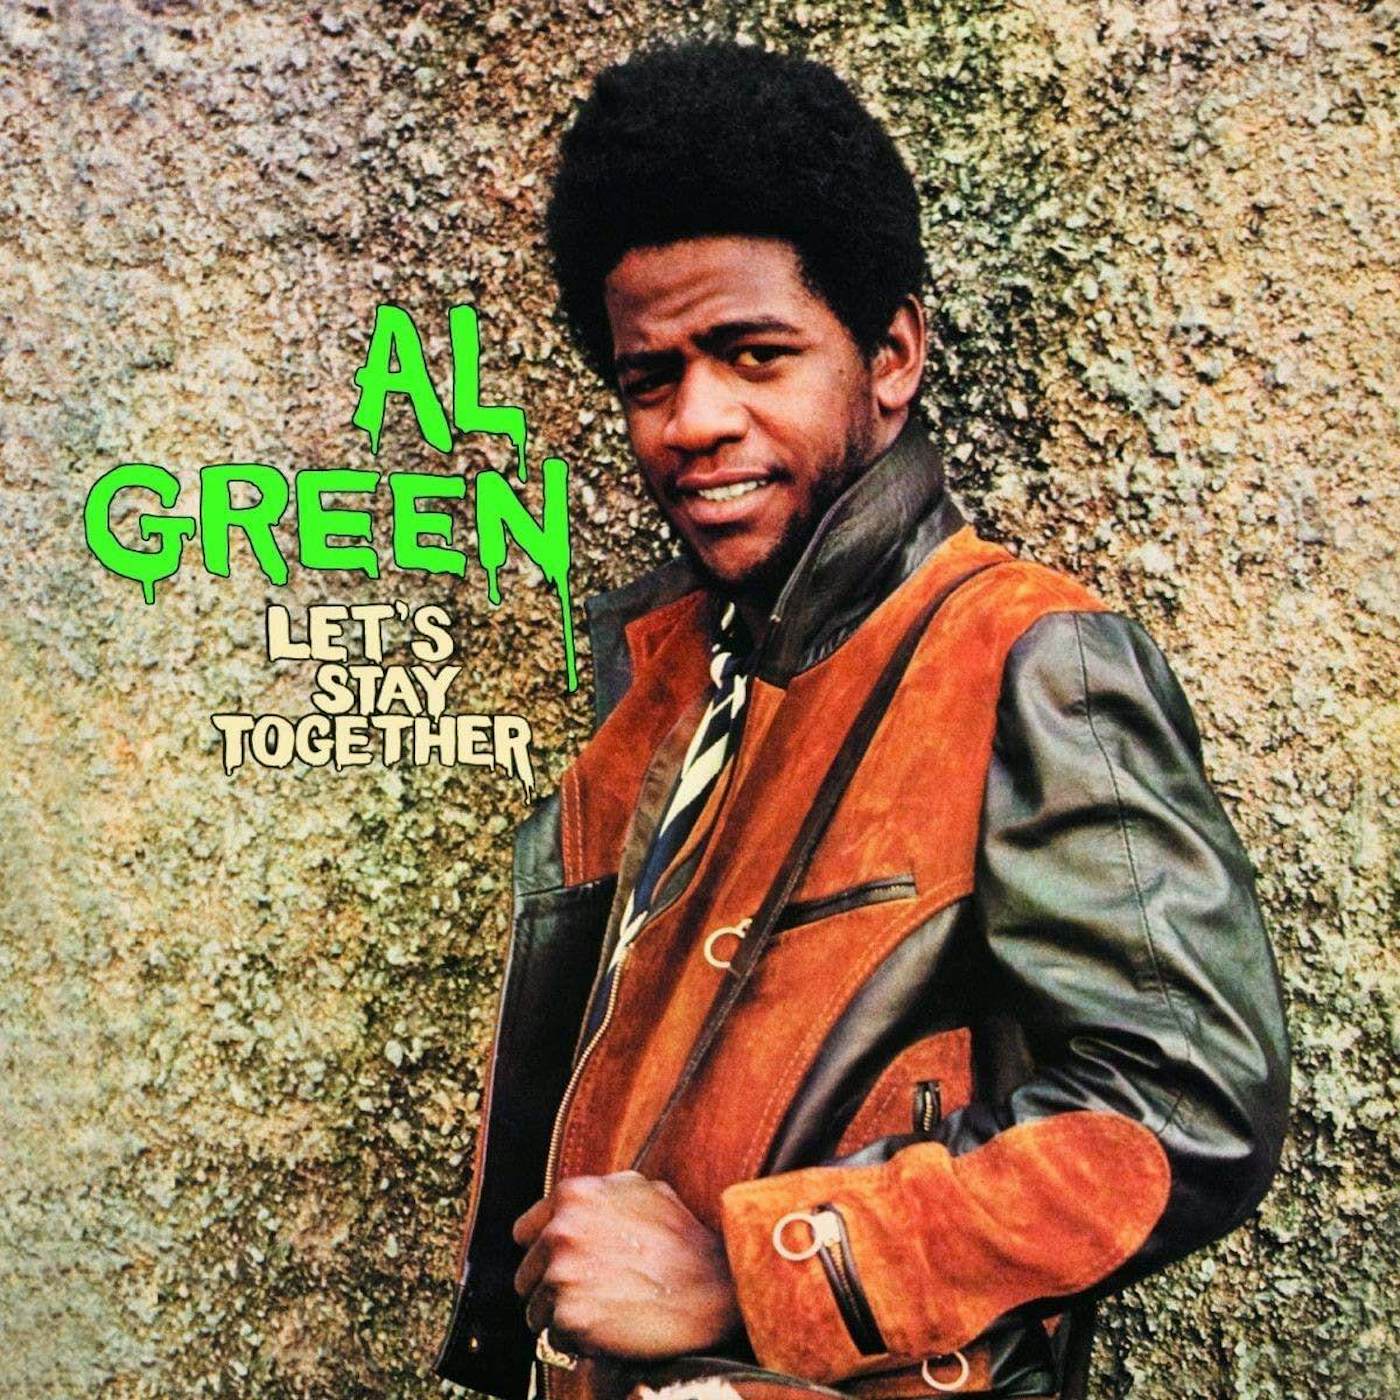 Al Green Let's Stay Together Vinyl Record